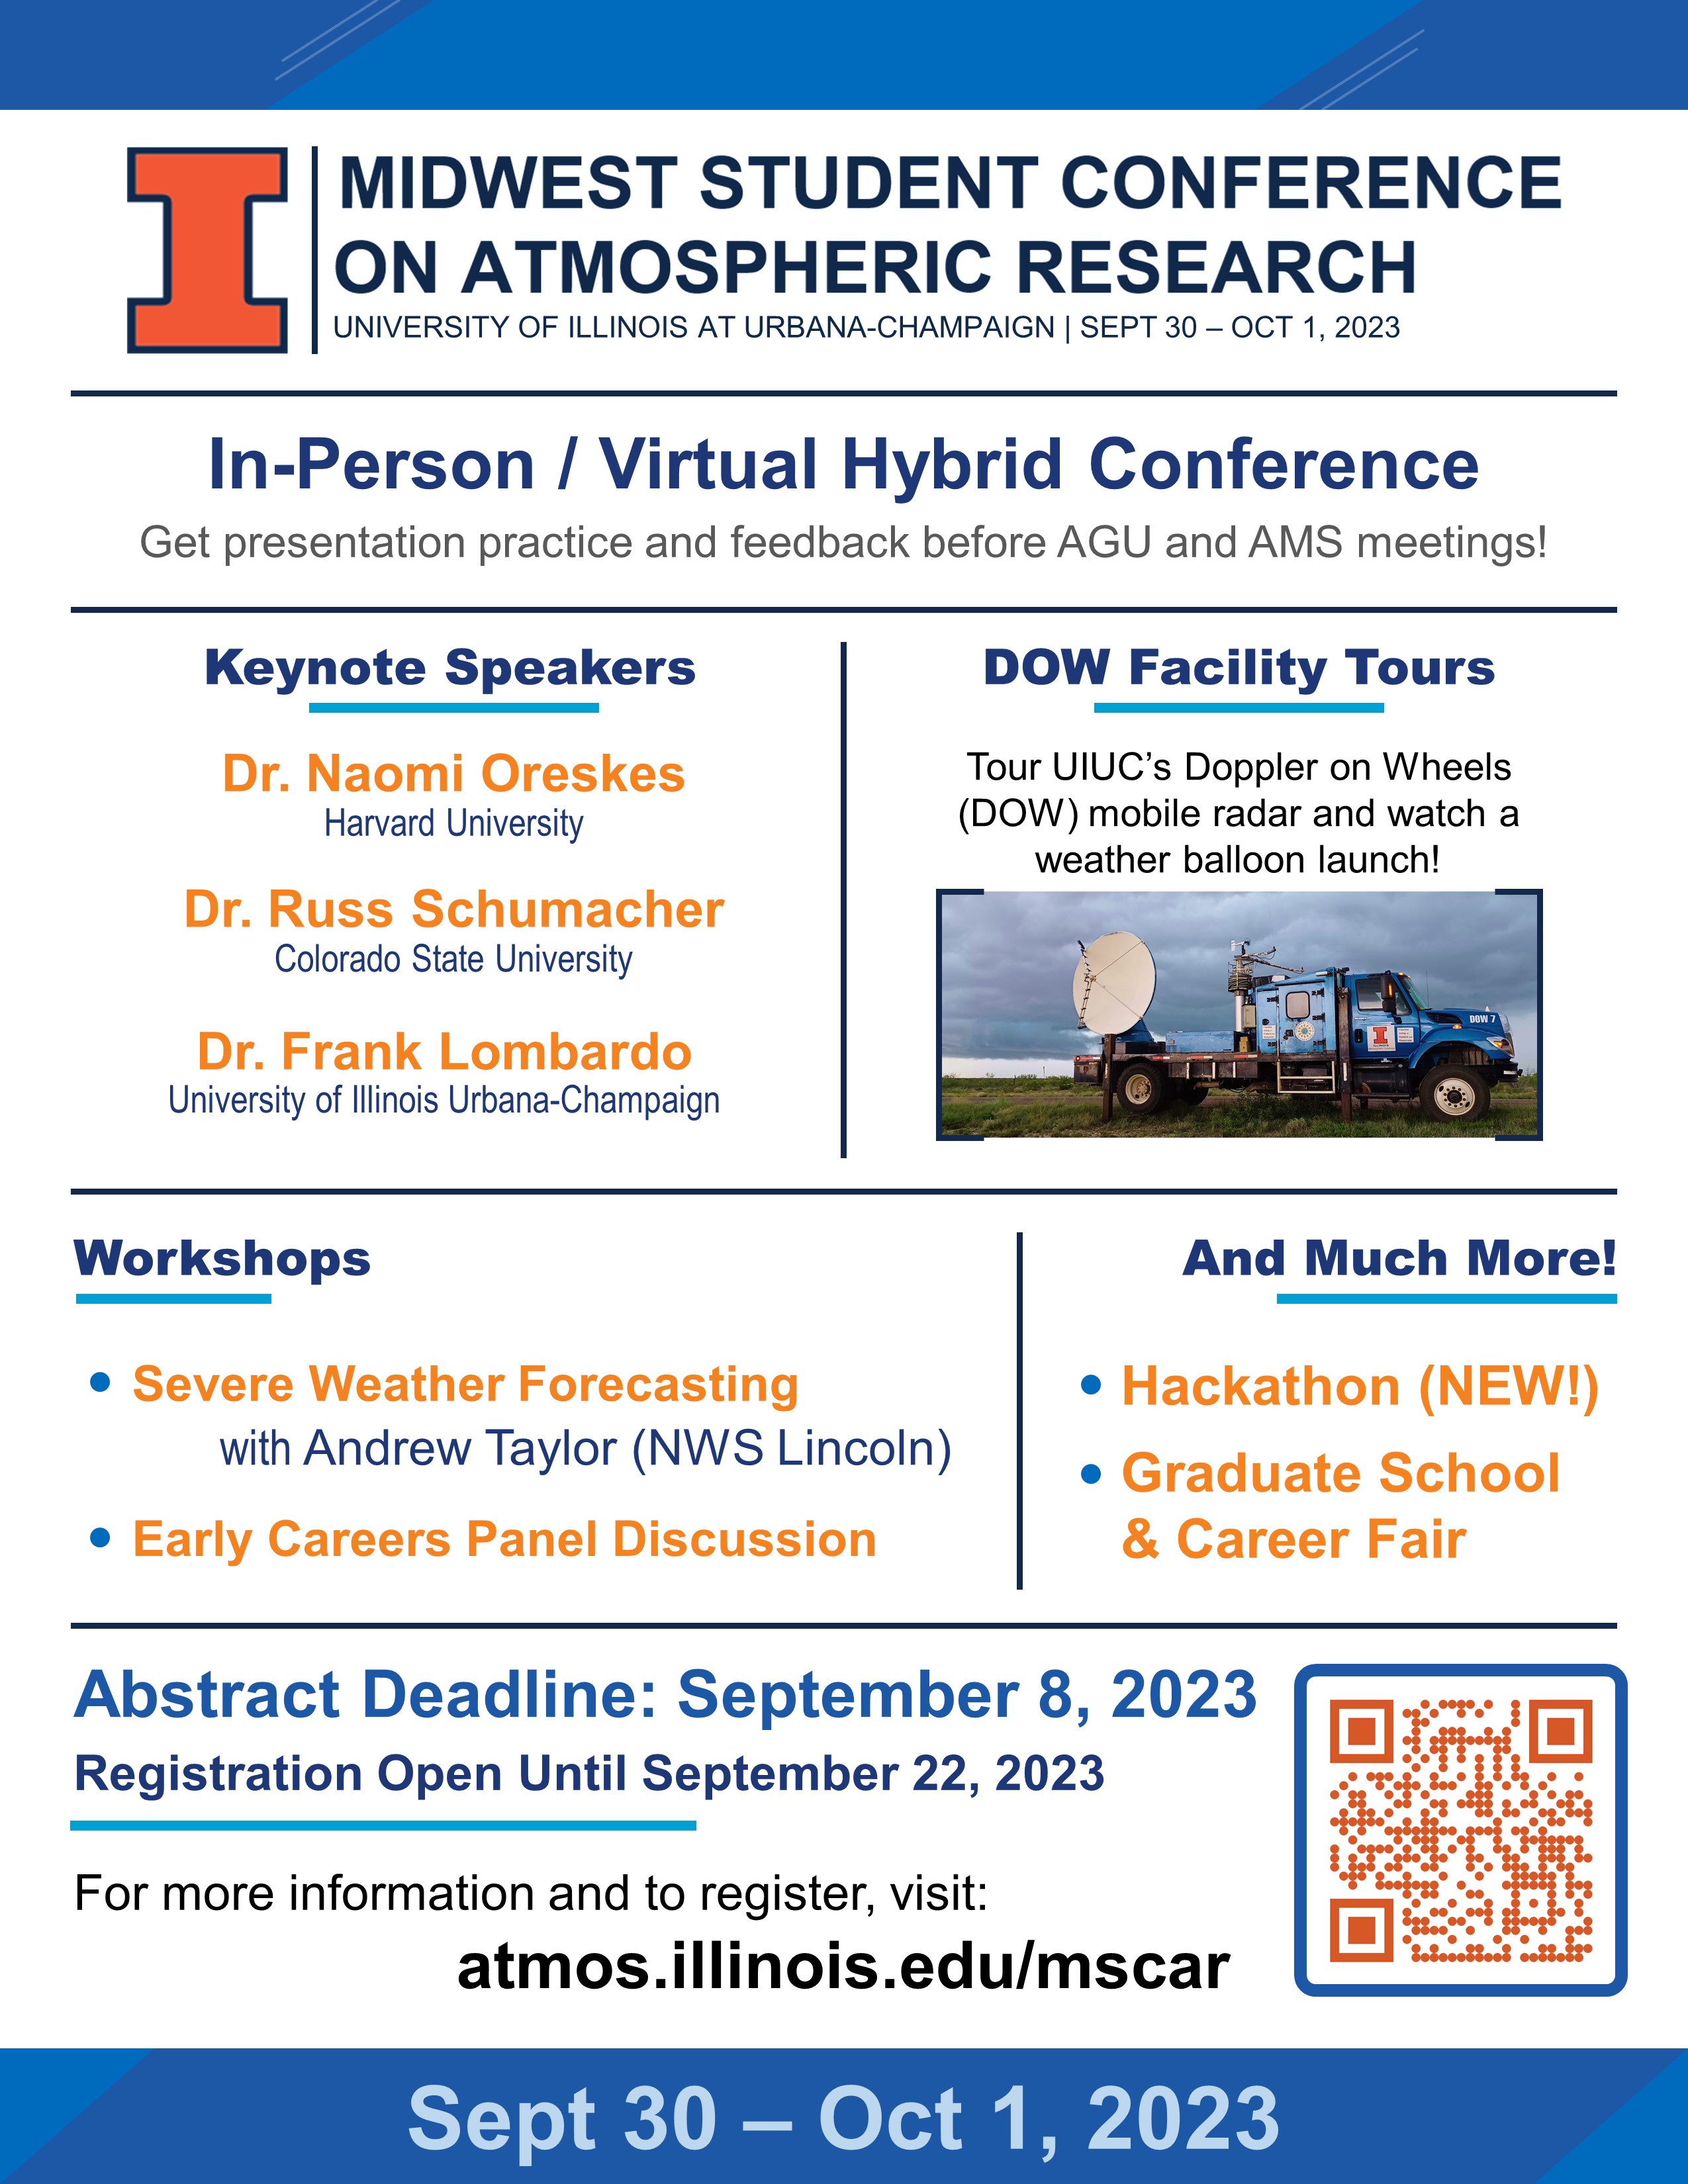 7th annual Midwest Student Conference on Atmospheric Research